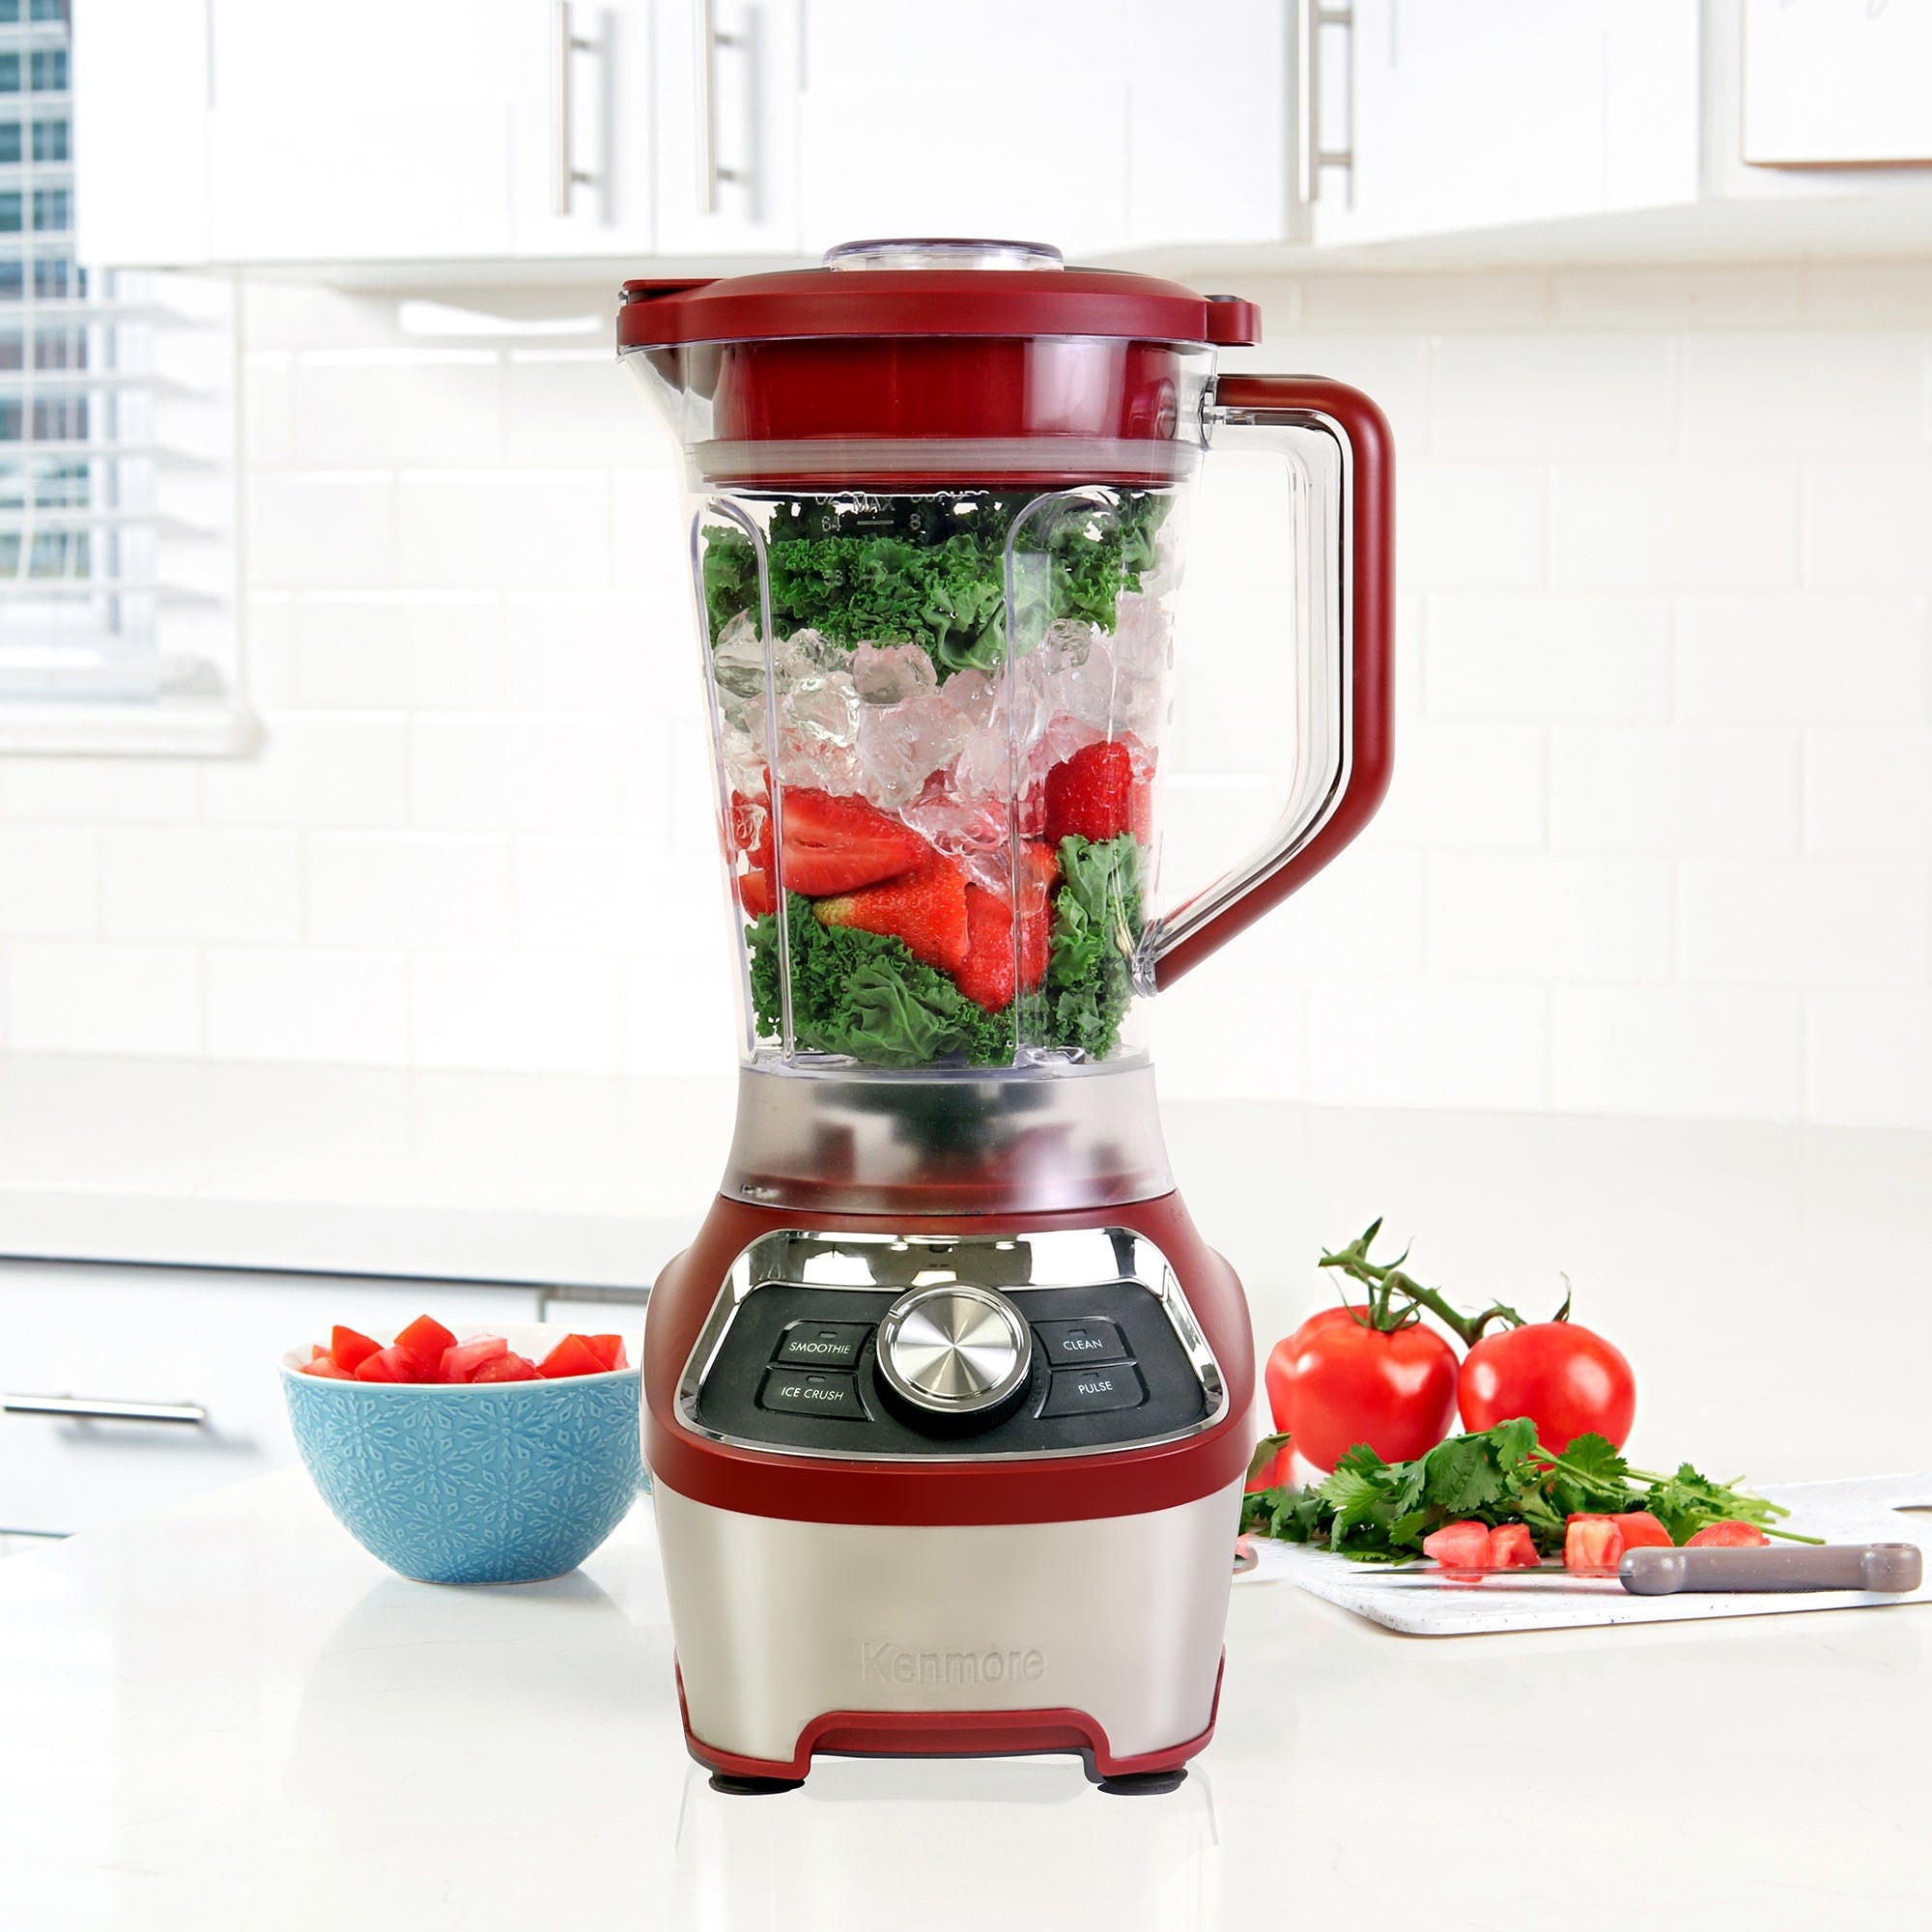 https://ak1.ostkcdn.com/images/products/is/images/direct/c859377792fb8d1f9c66f692daa7cf3b872b23da/Kenmore-64-oz-Stand-Blender%2C-1200W%2C-Smoothie%2C-Ice-Crush%2C-Self-Clean-Modes%2C-Variable-Speed%2C-Red.jpg